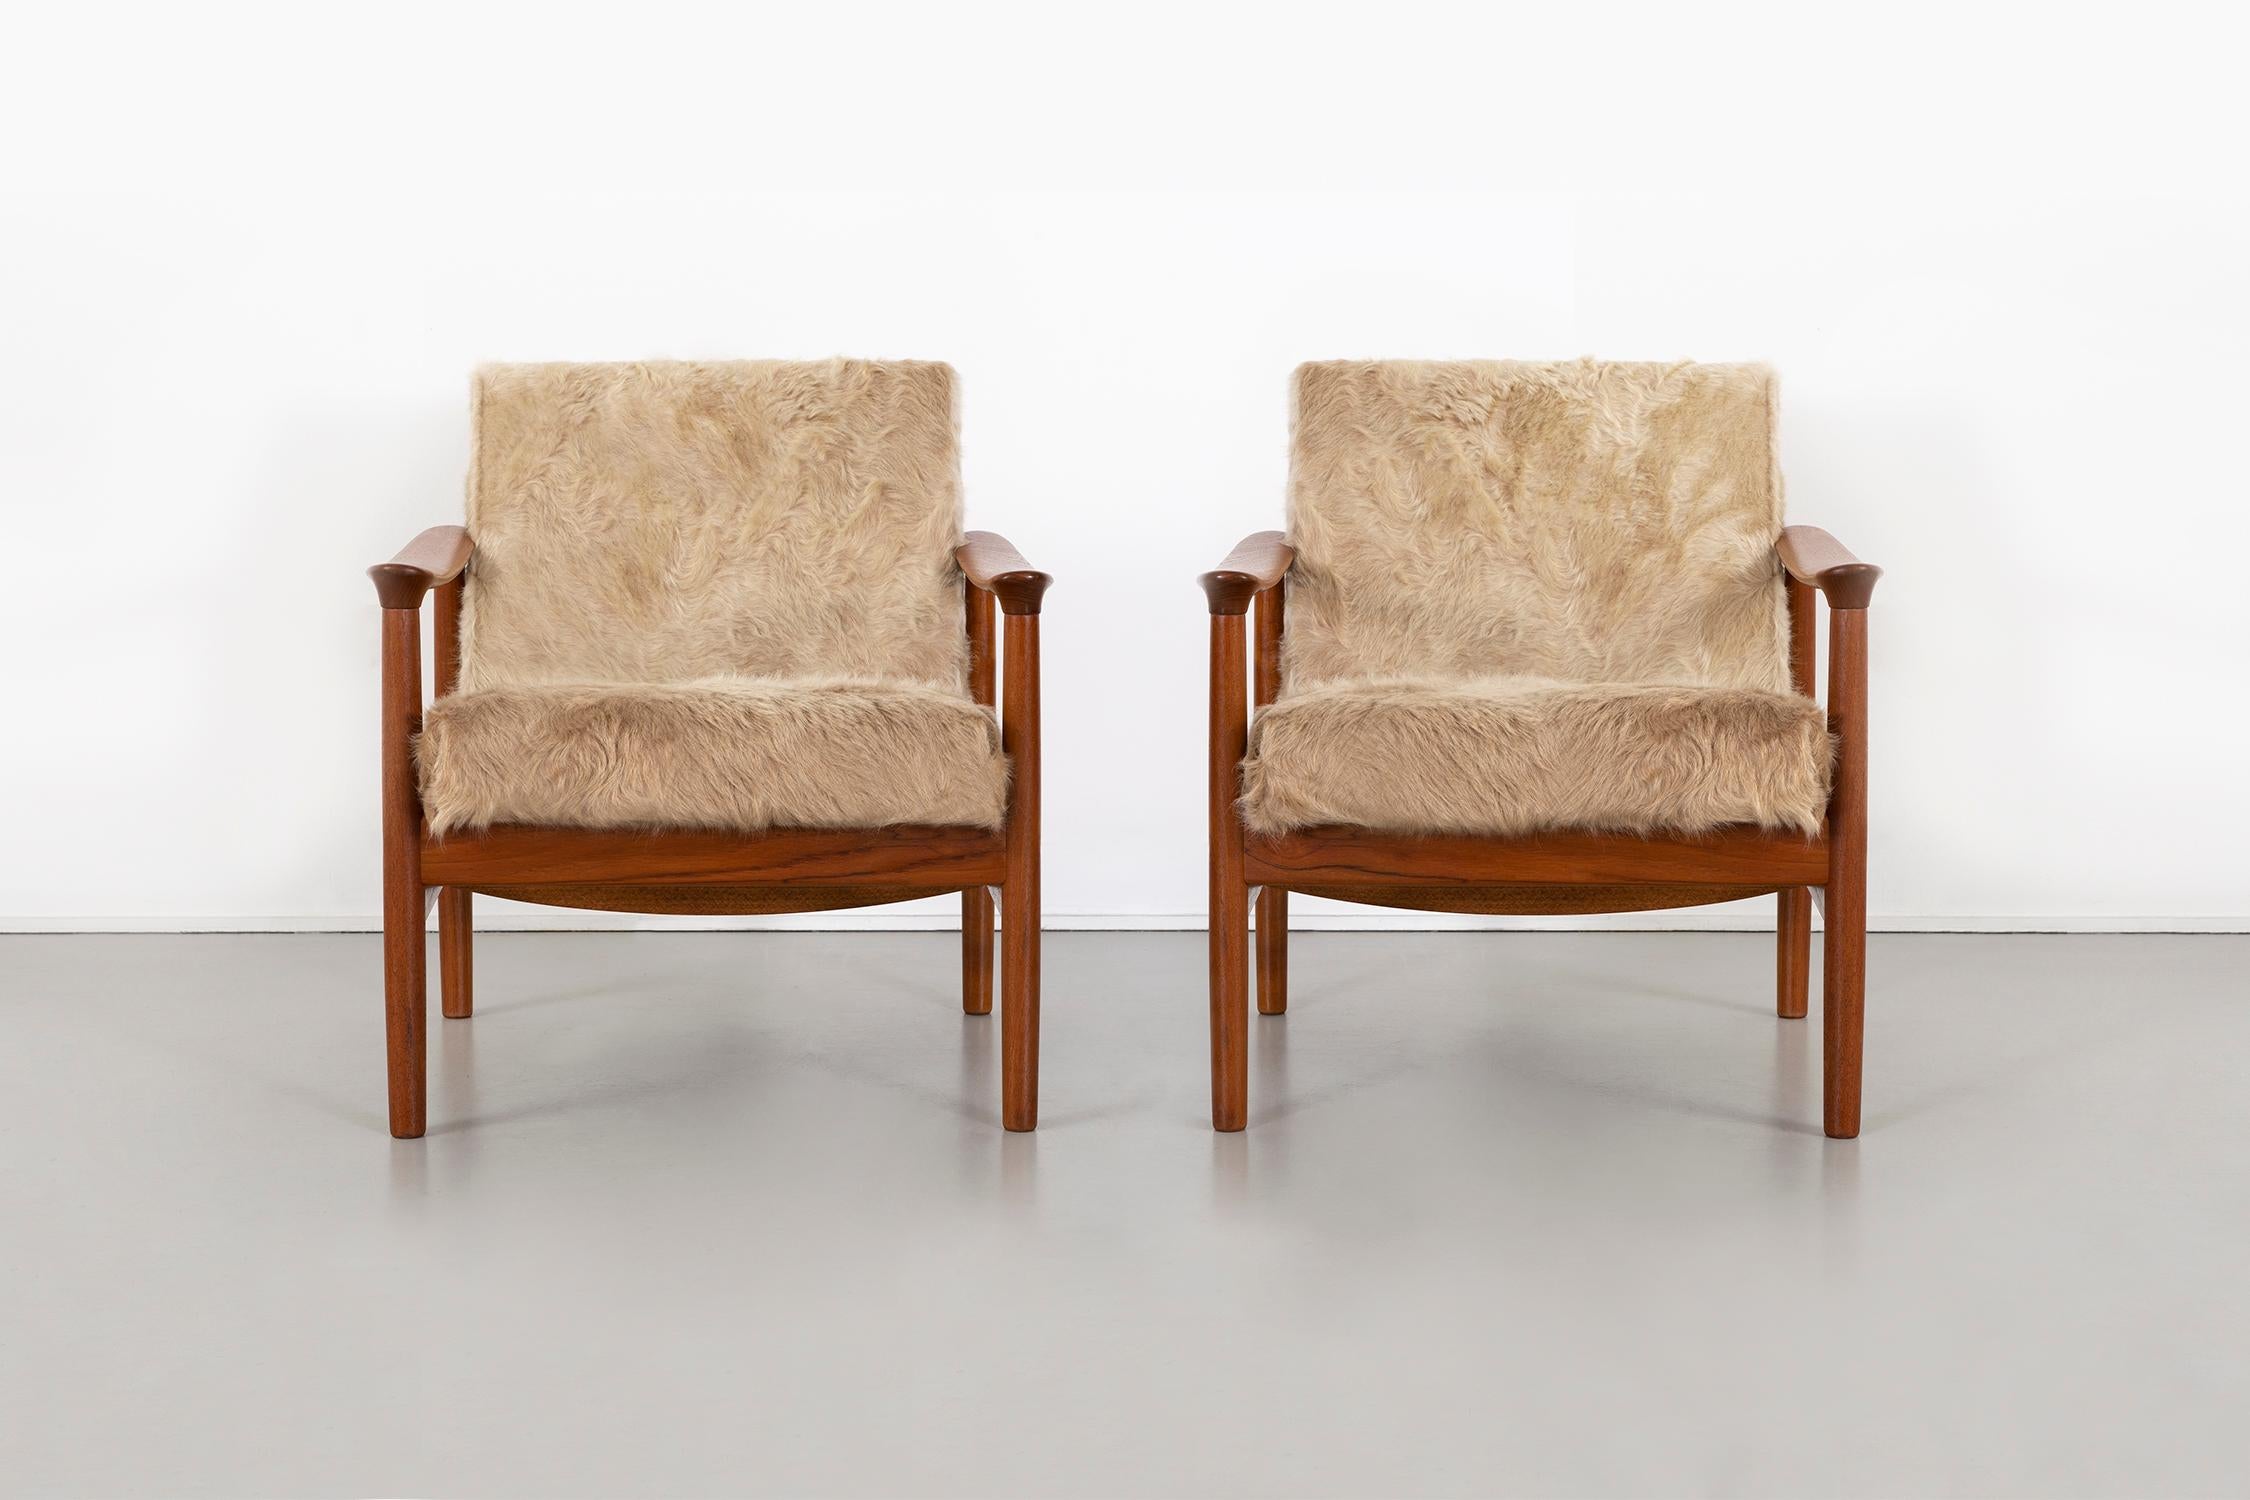 Set of two lounge chairs

designed by Westnofa

Norway, circa 1960s

Freshly reupholstered in long hair Brazilian cowhide with refinished walnut frames 

Measures: 28 ½ H x 25 ? W x 33 ? D x seat 13 ¼ H

Rare set of Westnofa chairs